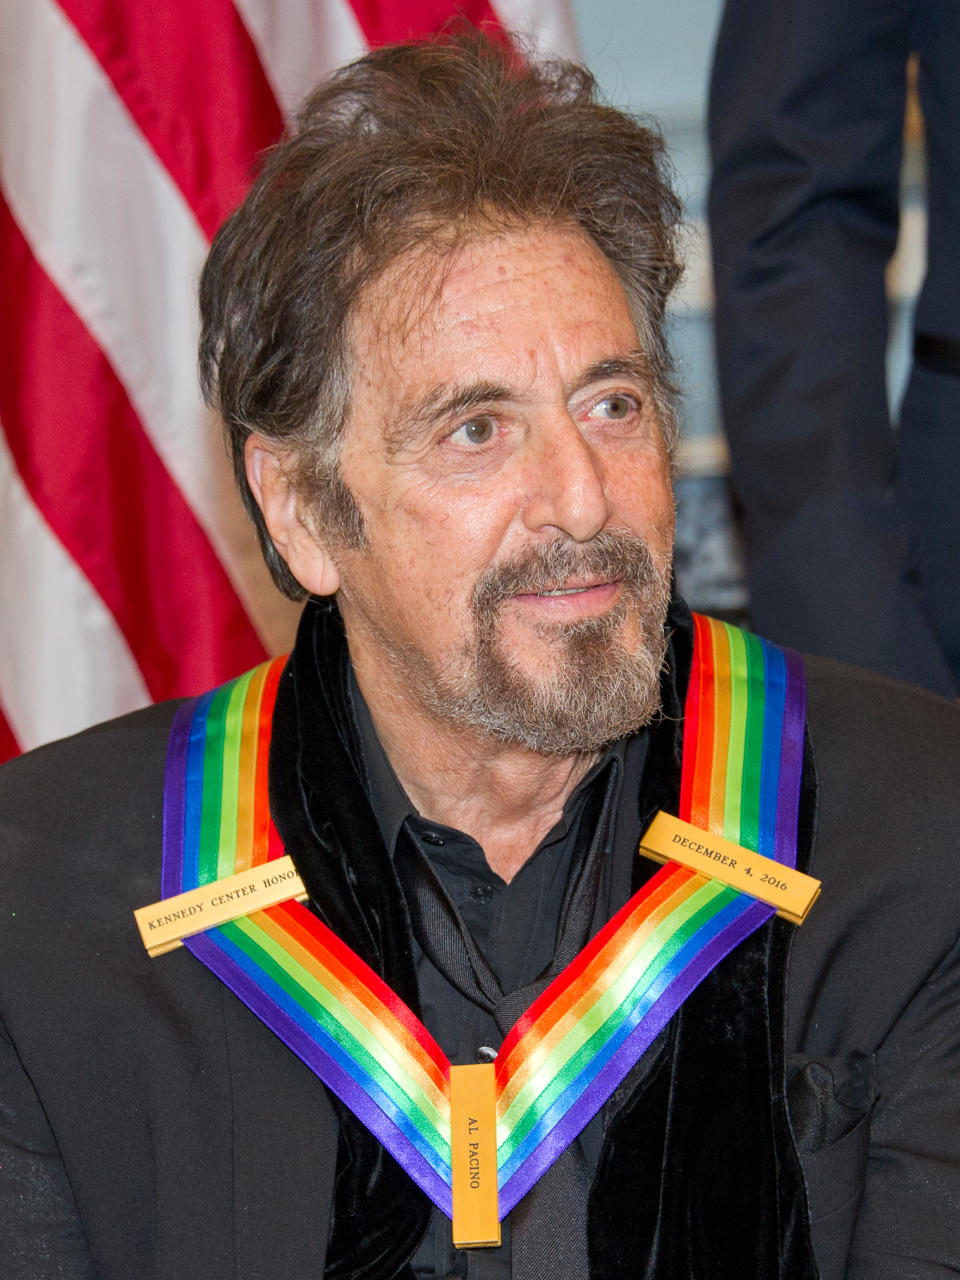 <p>Pacino was one of the five recipients at the 39th annual Kennedy Center Honors in 2016, along with Mavis Staples and others. </p>